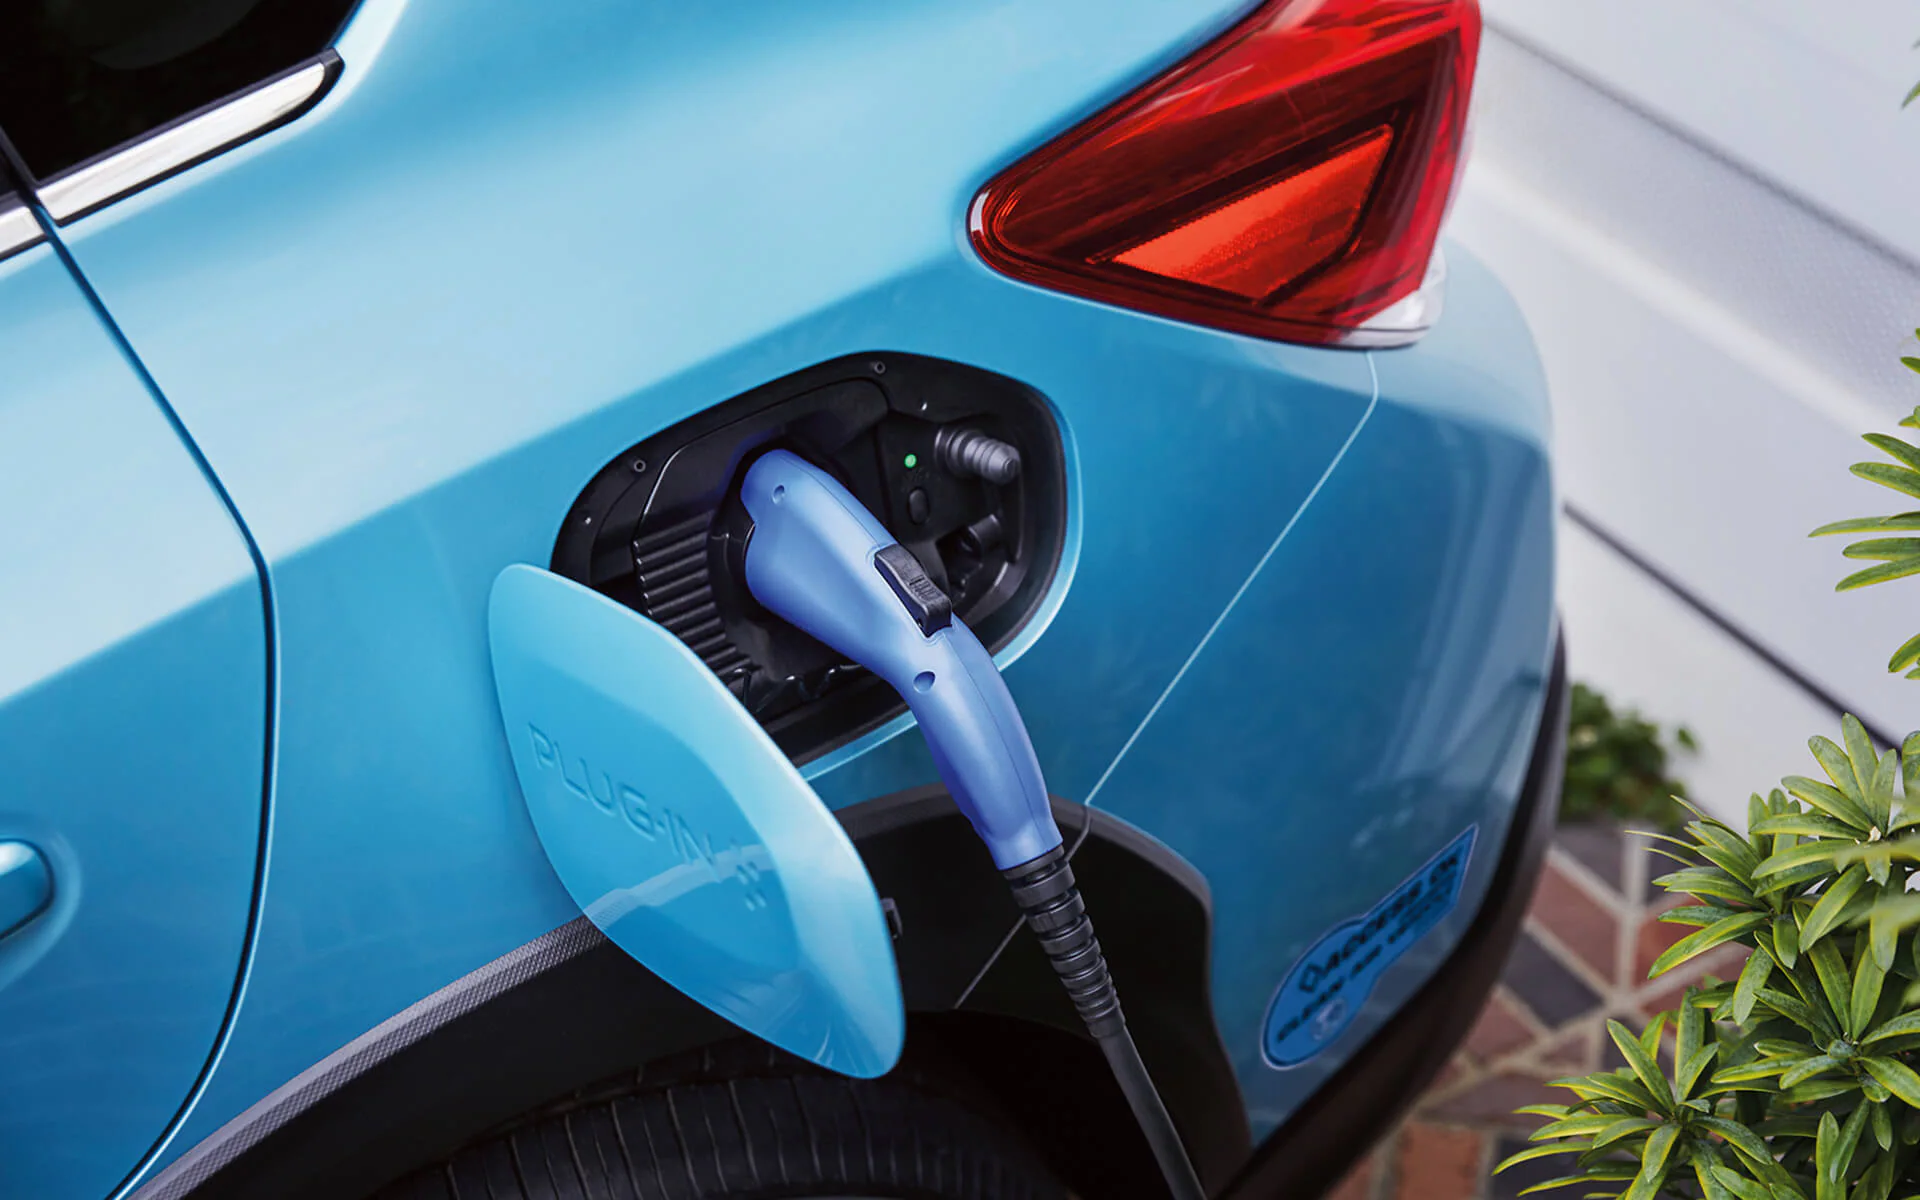 A close-up of the Subaru Crosstrek Hybrid’s charging port with charging cable plugged in